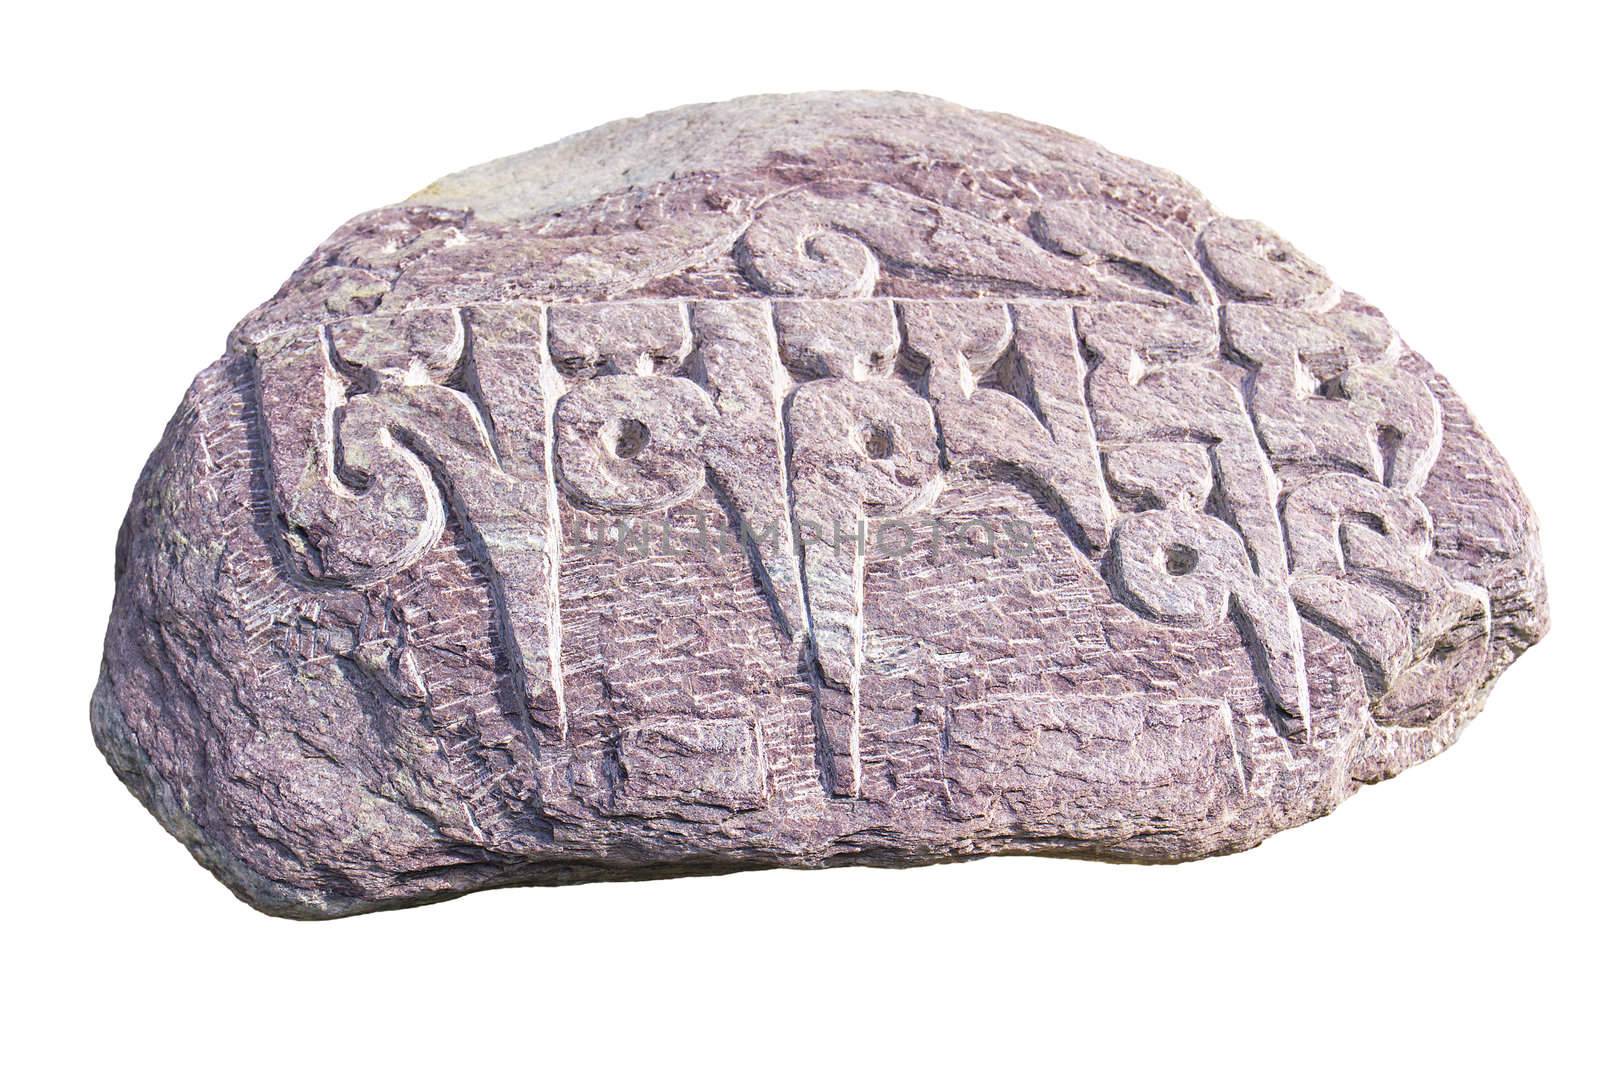 stones with inscriptions by Plus69